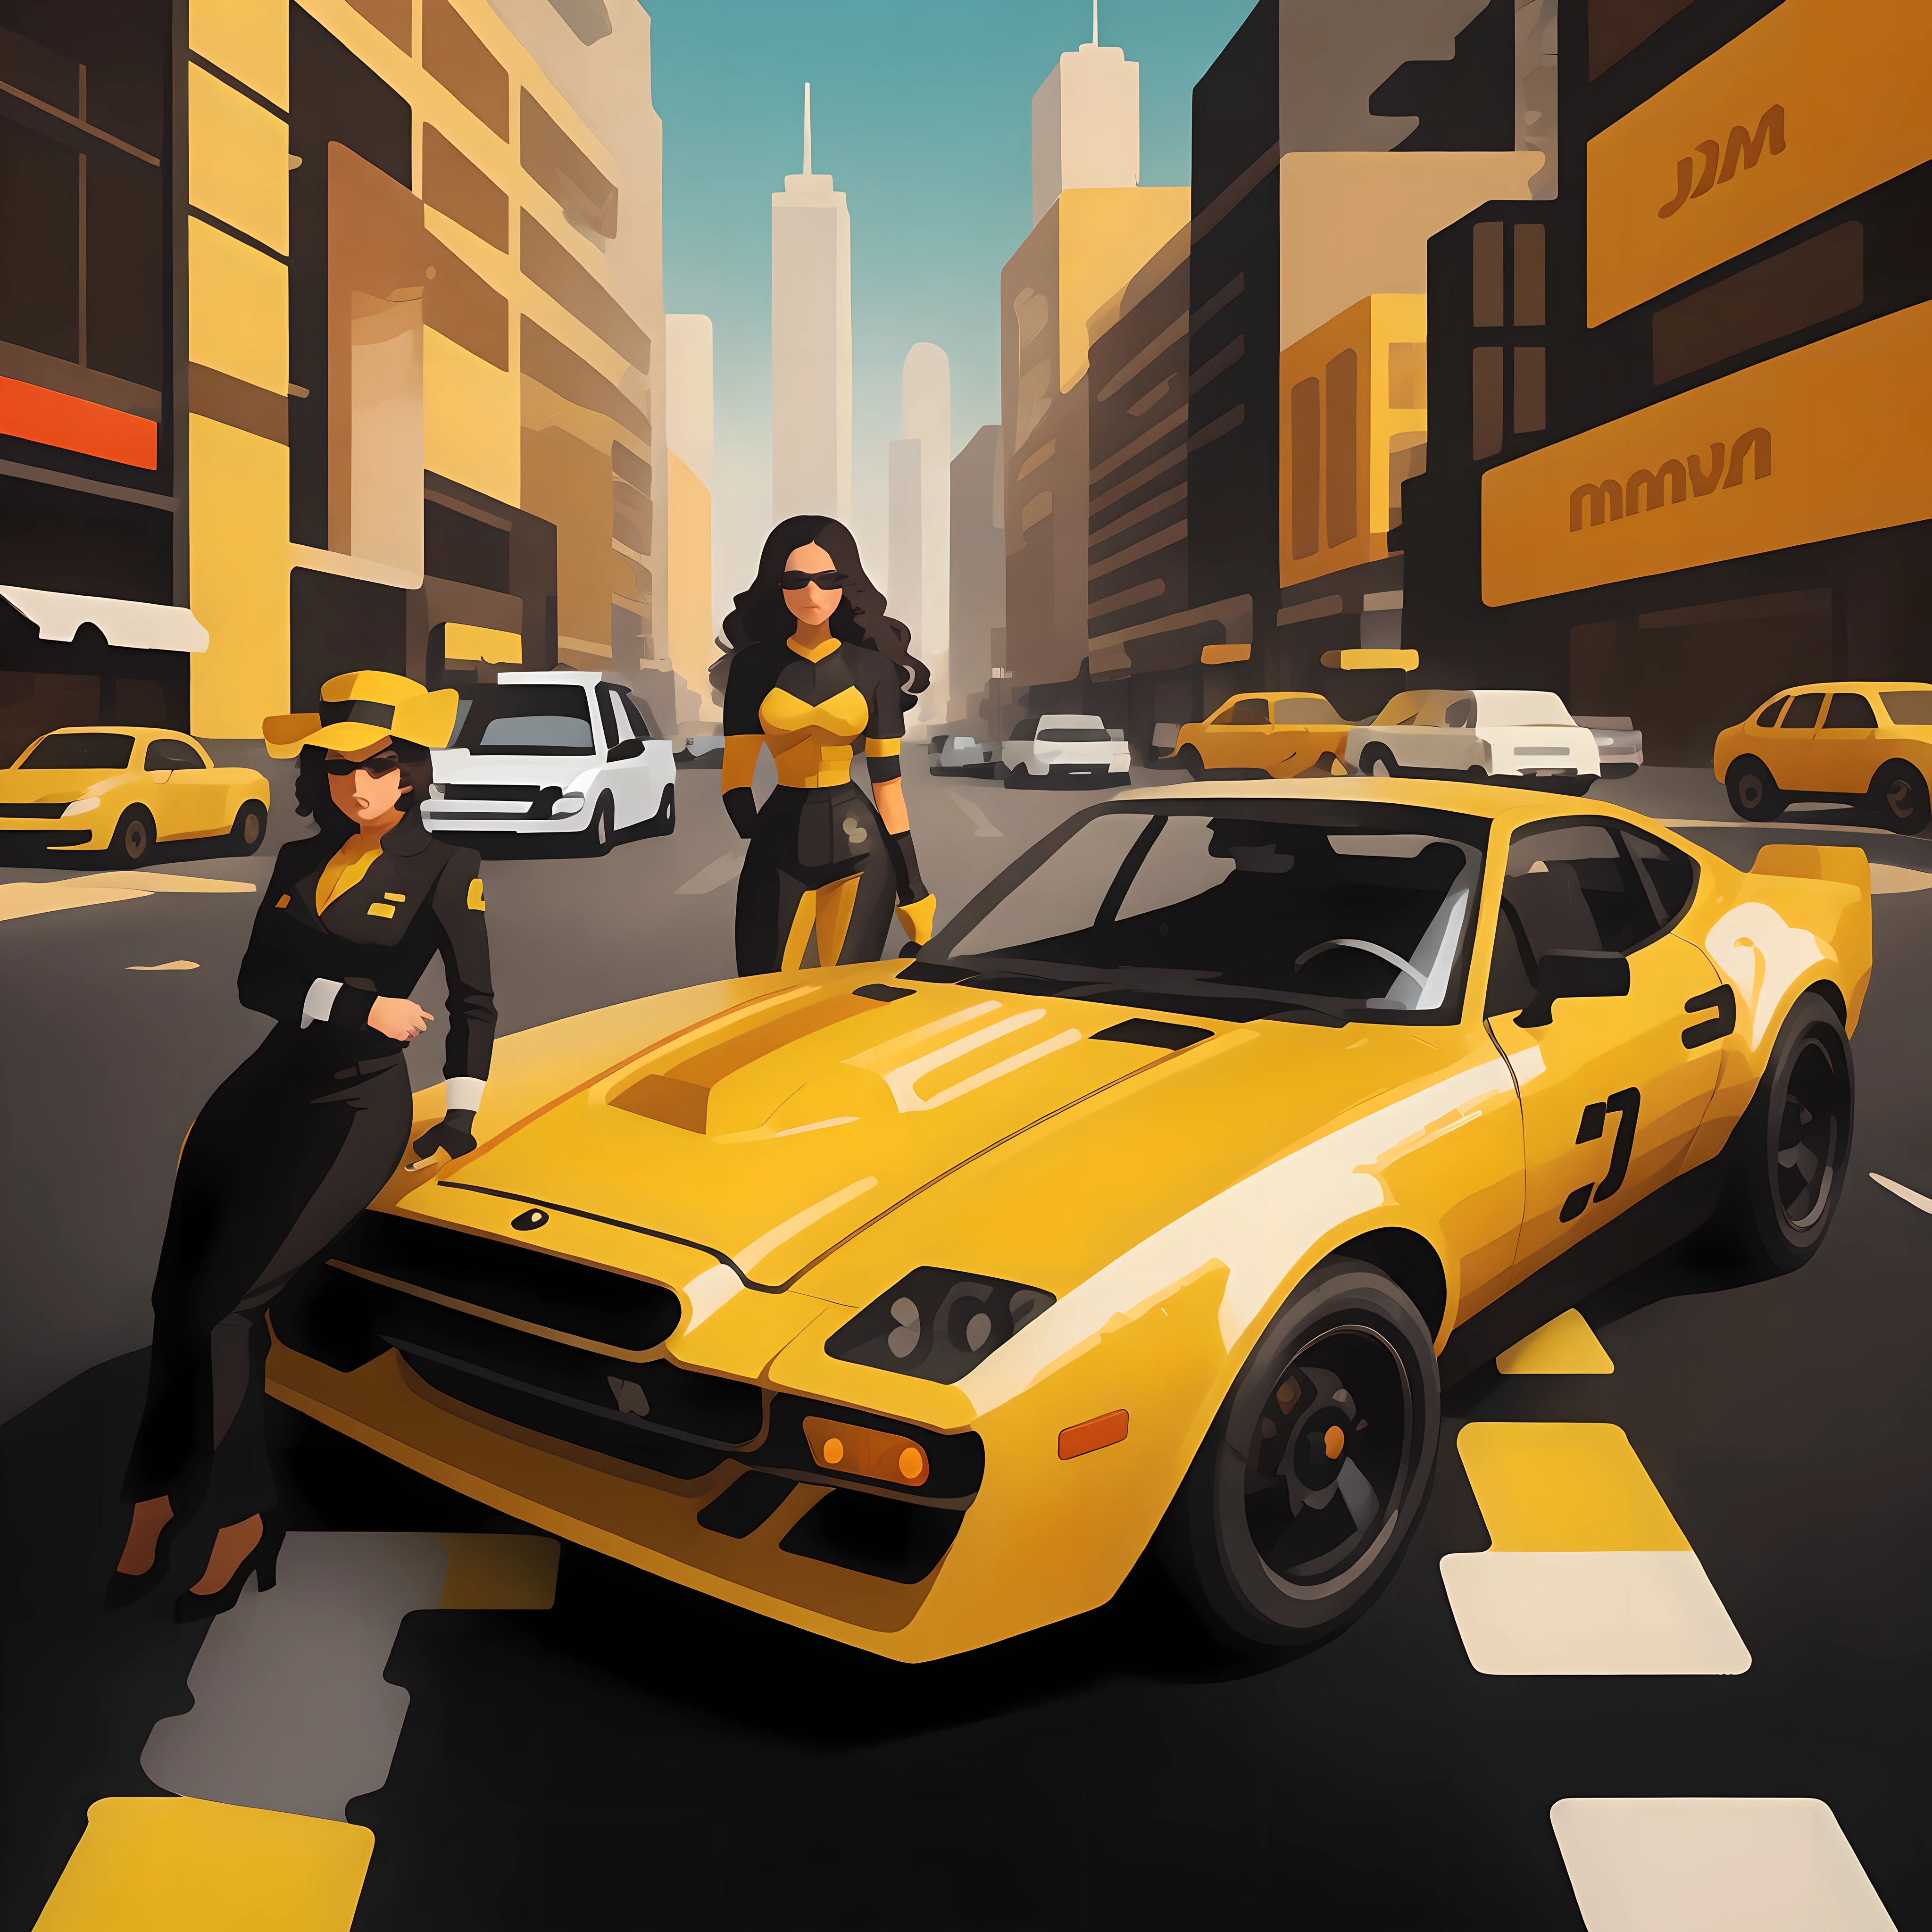 there is a woman driving a yellow race car on a city street, inspired by Kilian Eng, inspired by Jim Steranko, in style of syd mead, inspired by Syd Mead, the style of syd mead, dan mcpharlin : : ornate, dan mcpharlin, syd mead and mark brooks, syd mead style, syd mead cinematic painting, martin ansin